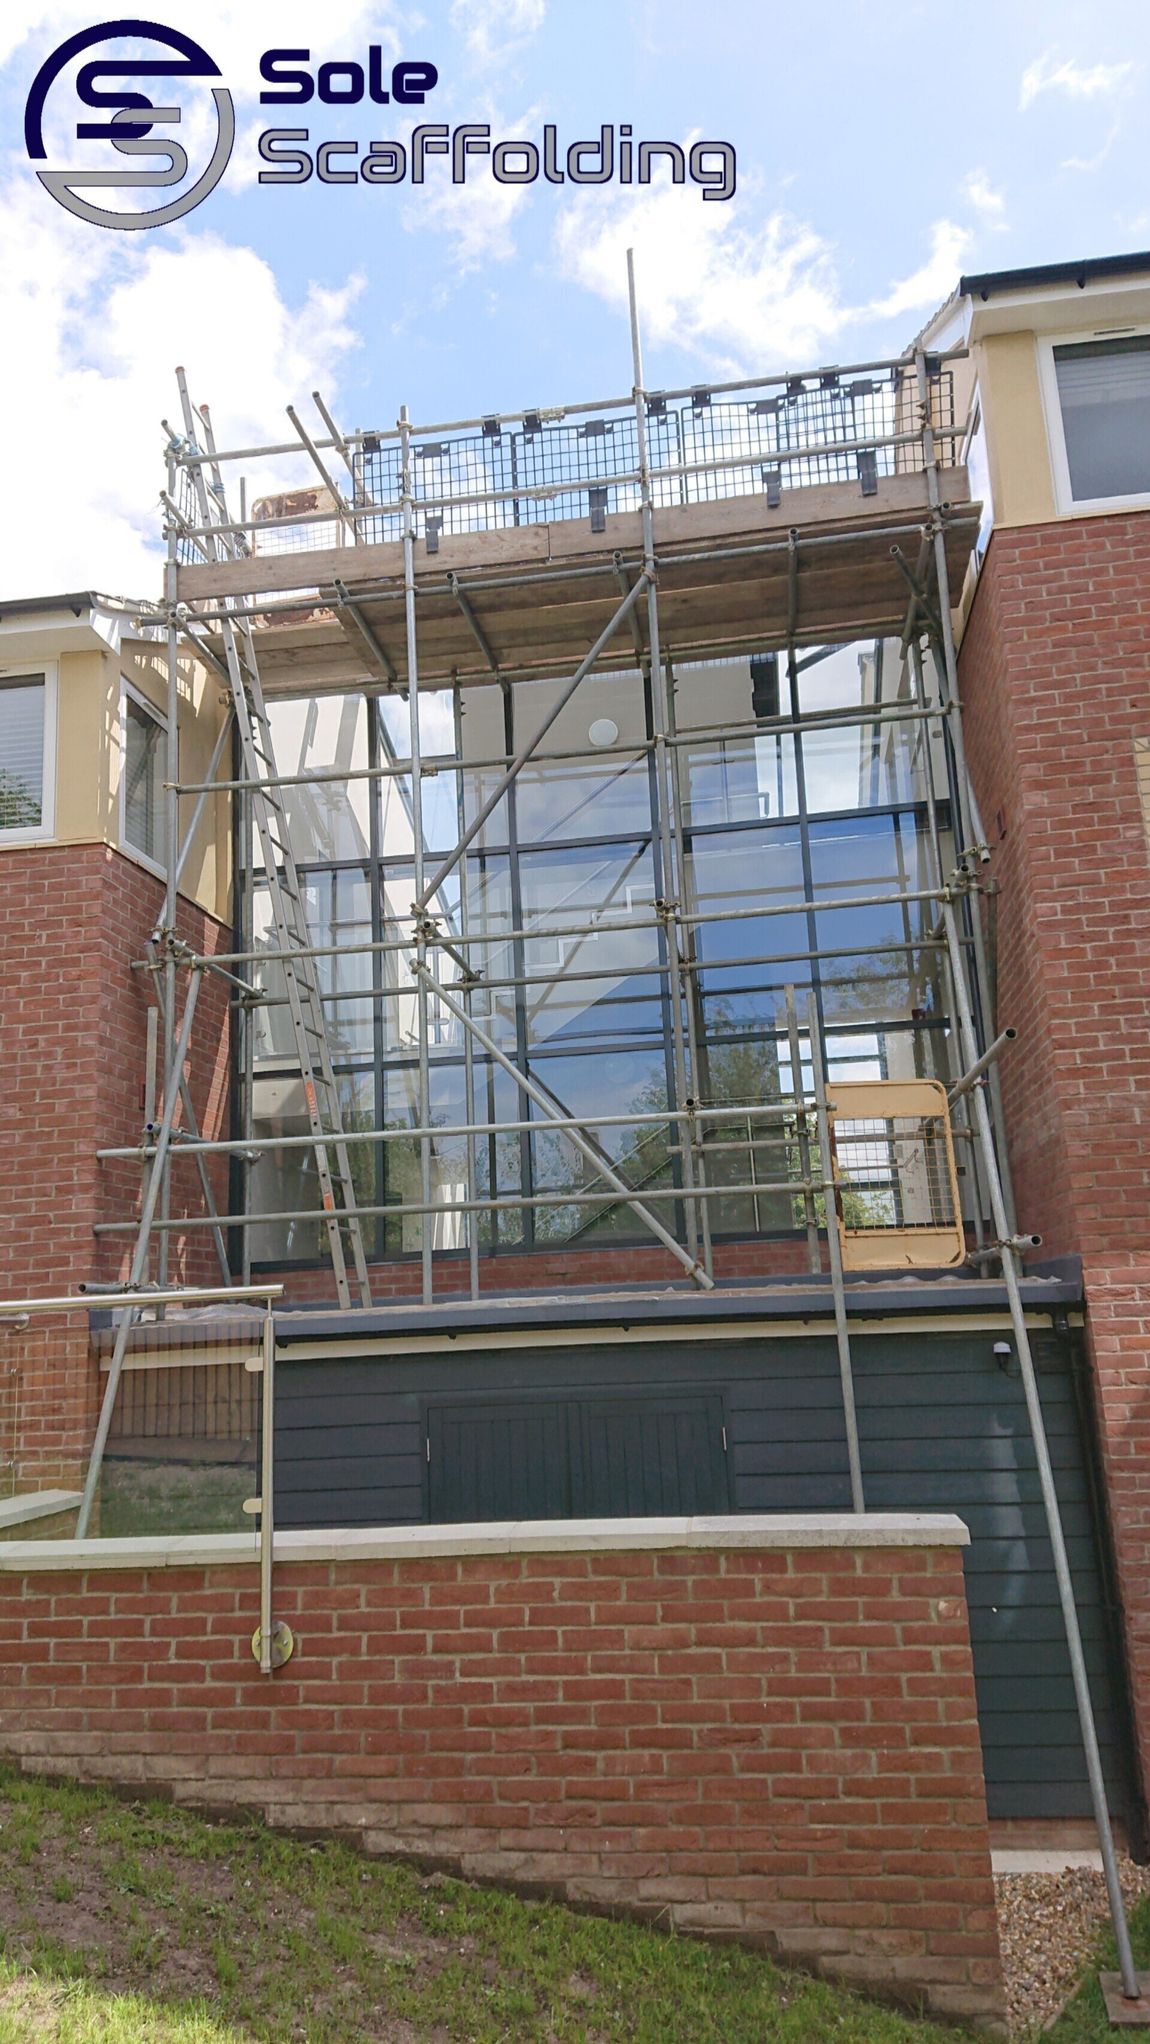 sole scaffolding - Scaffold for glass roof repair in Bury St Edmunds